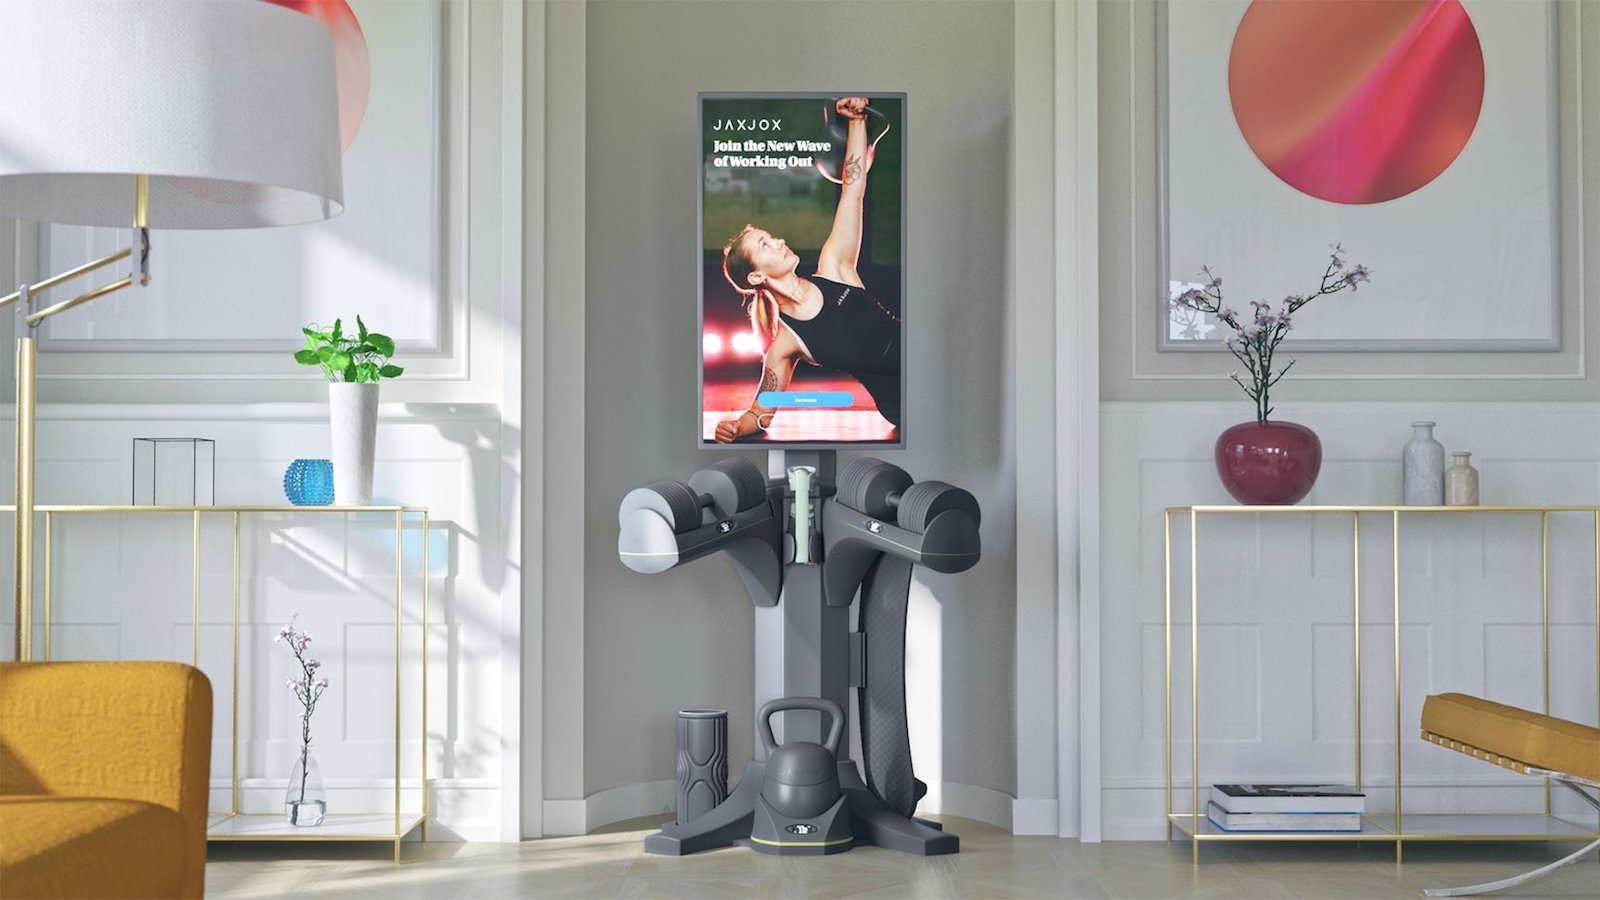 JAXJOX InteractiveStudio home fitness equipment organizes and stores all of your weights